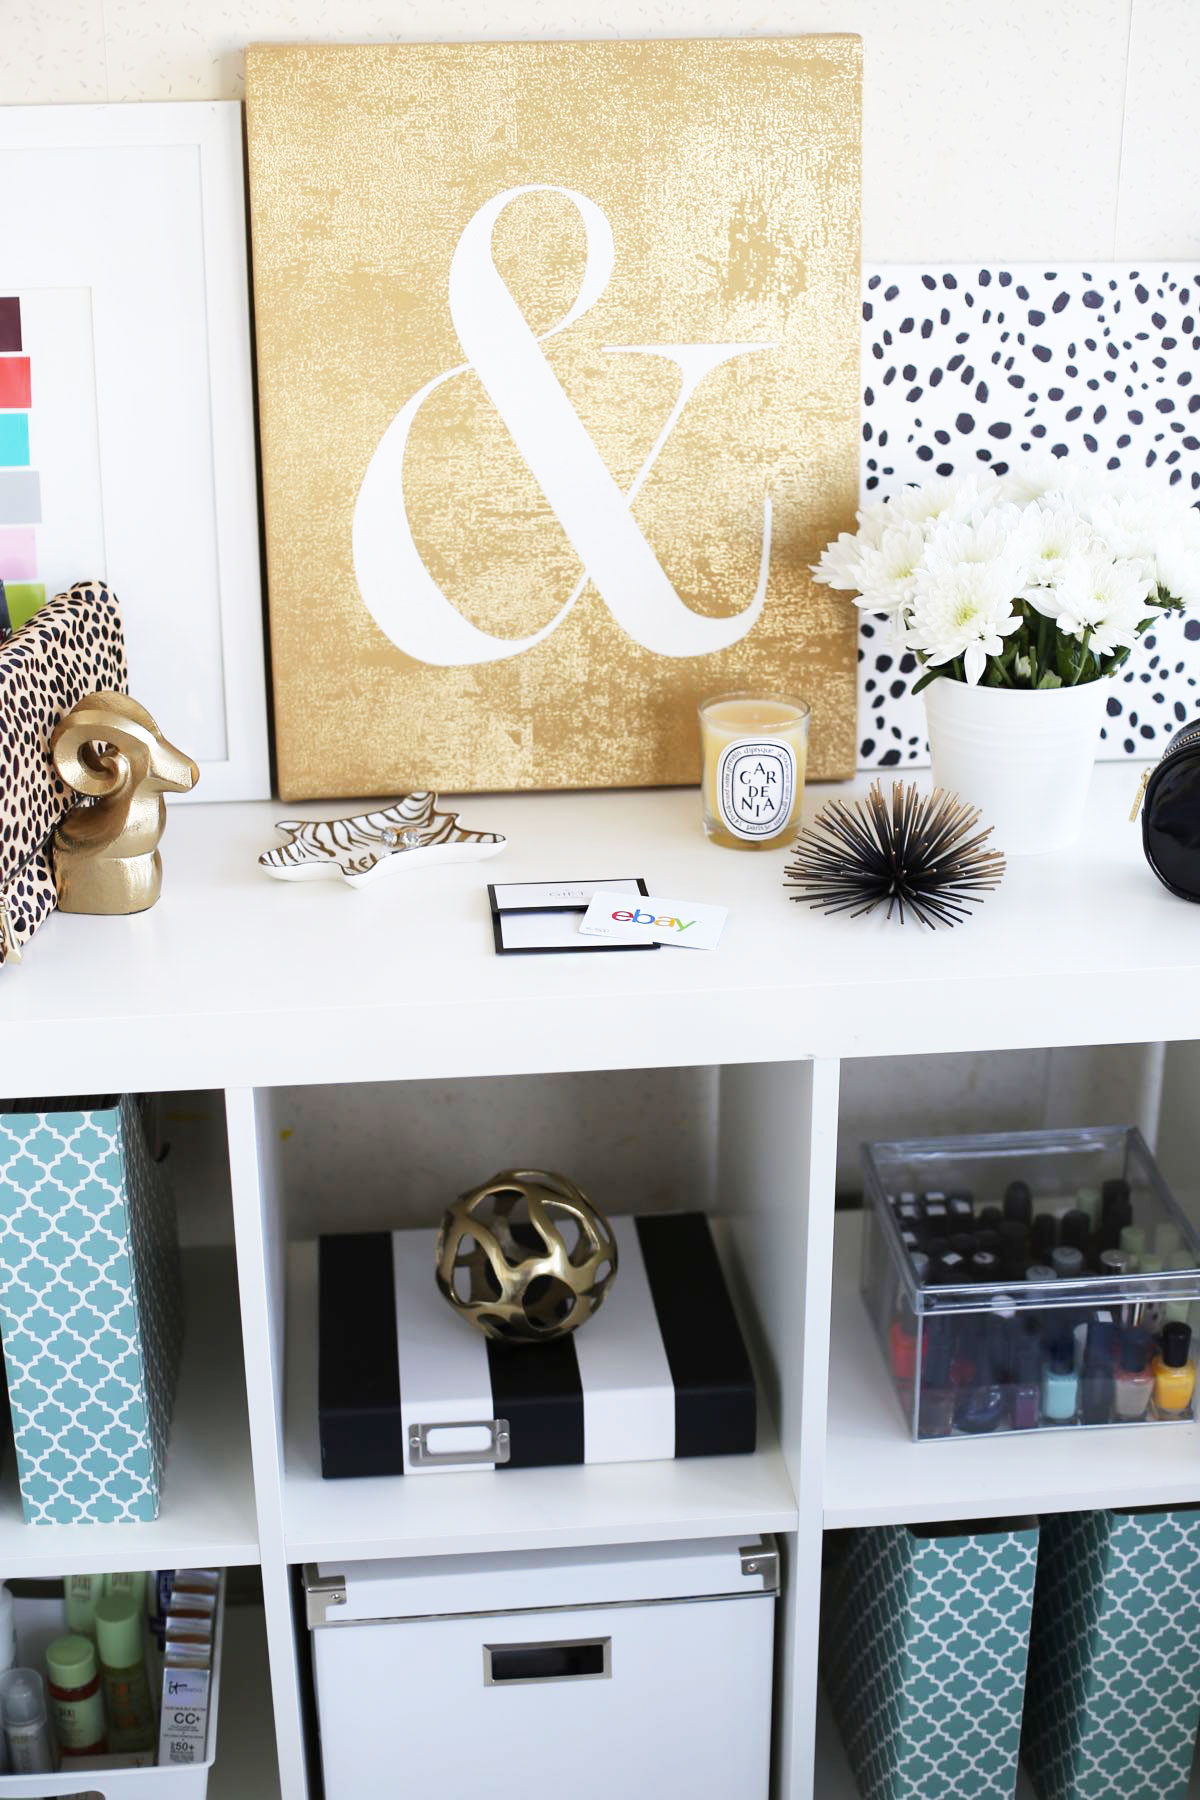 Spring clean your office with these essential, affordable organizing ideas.